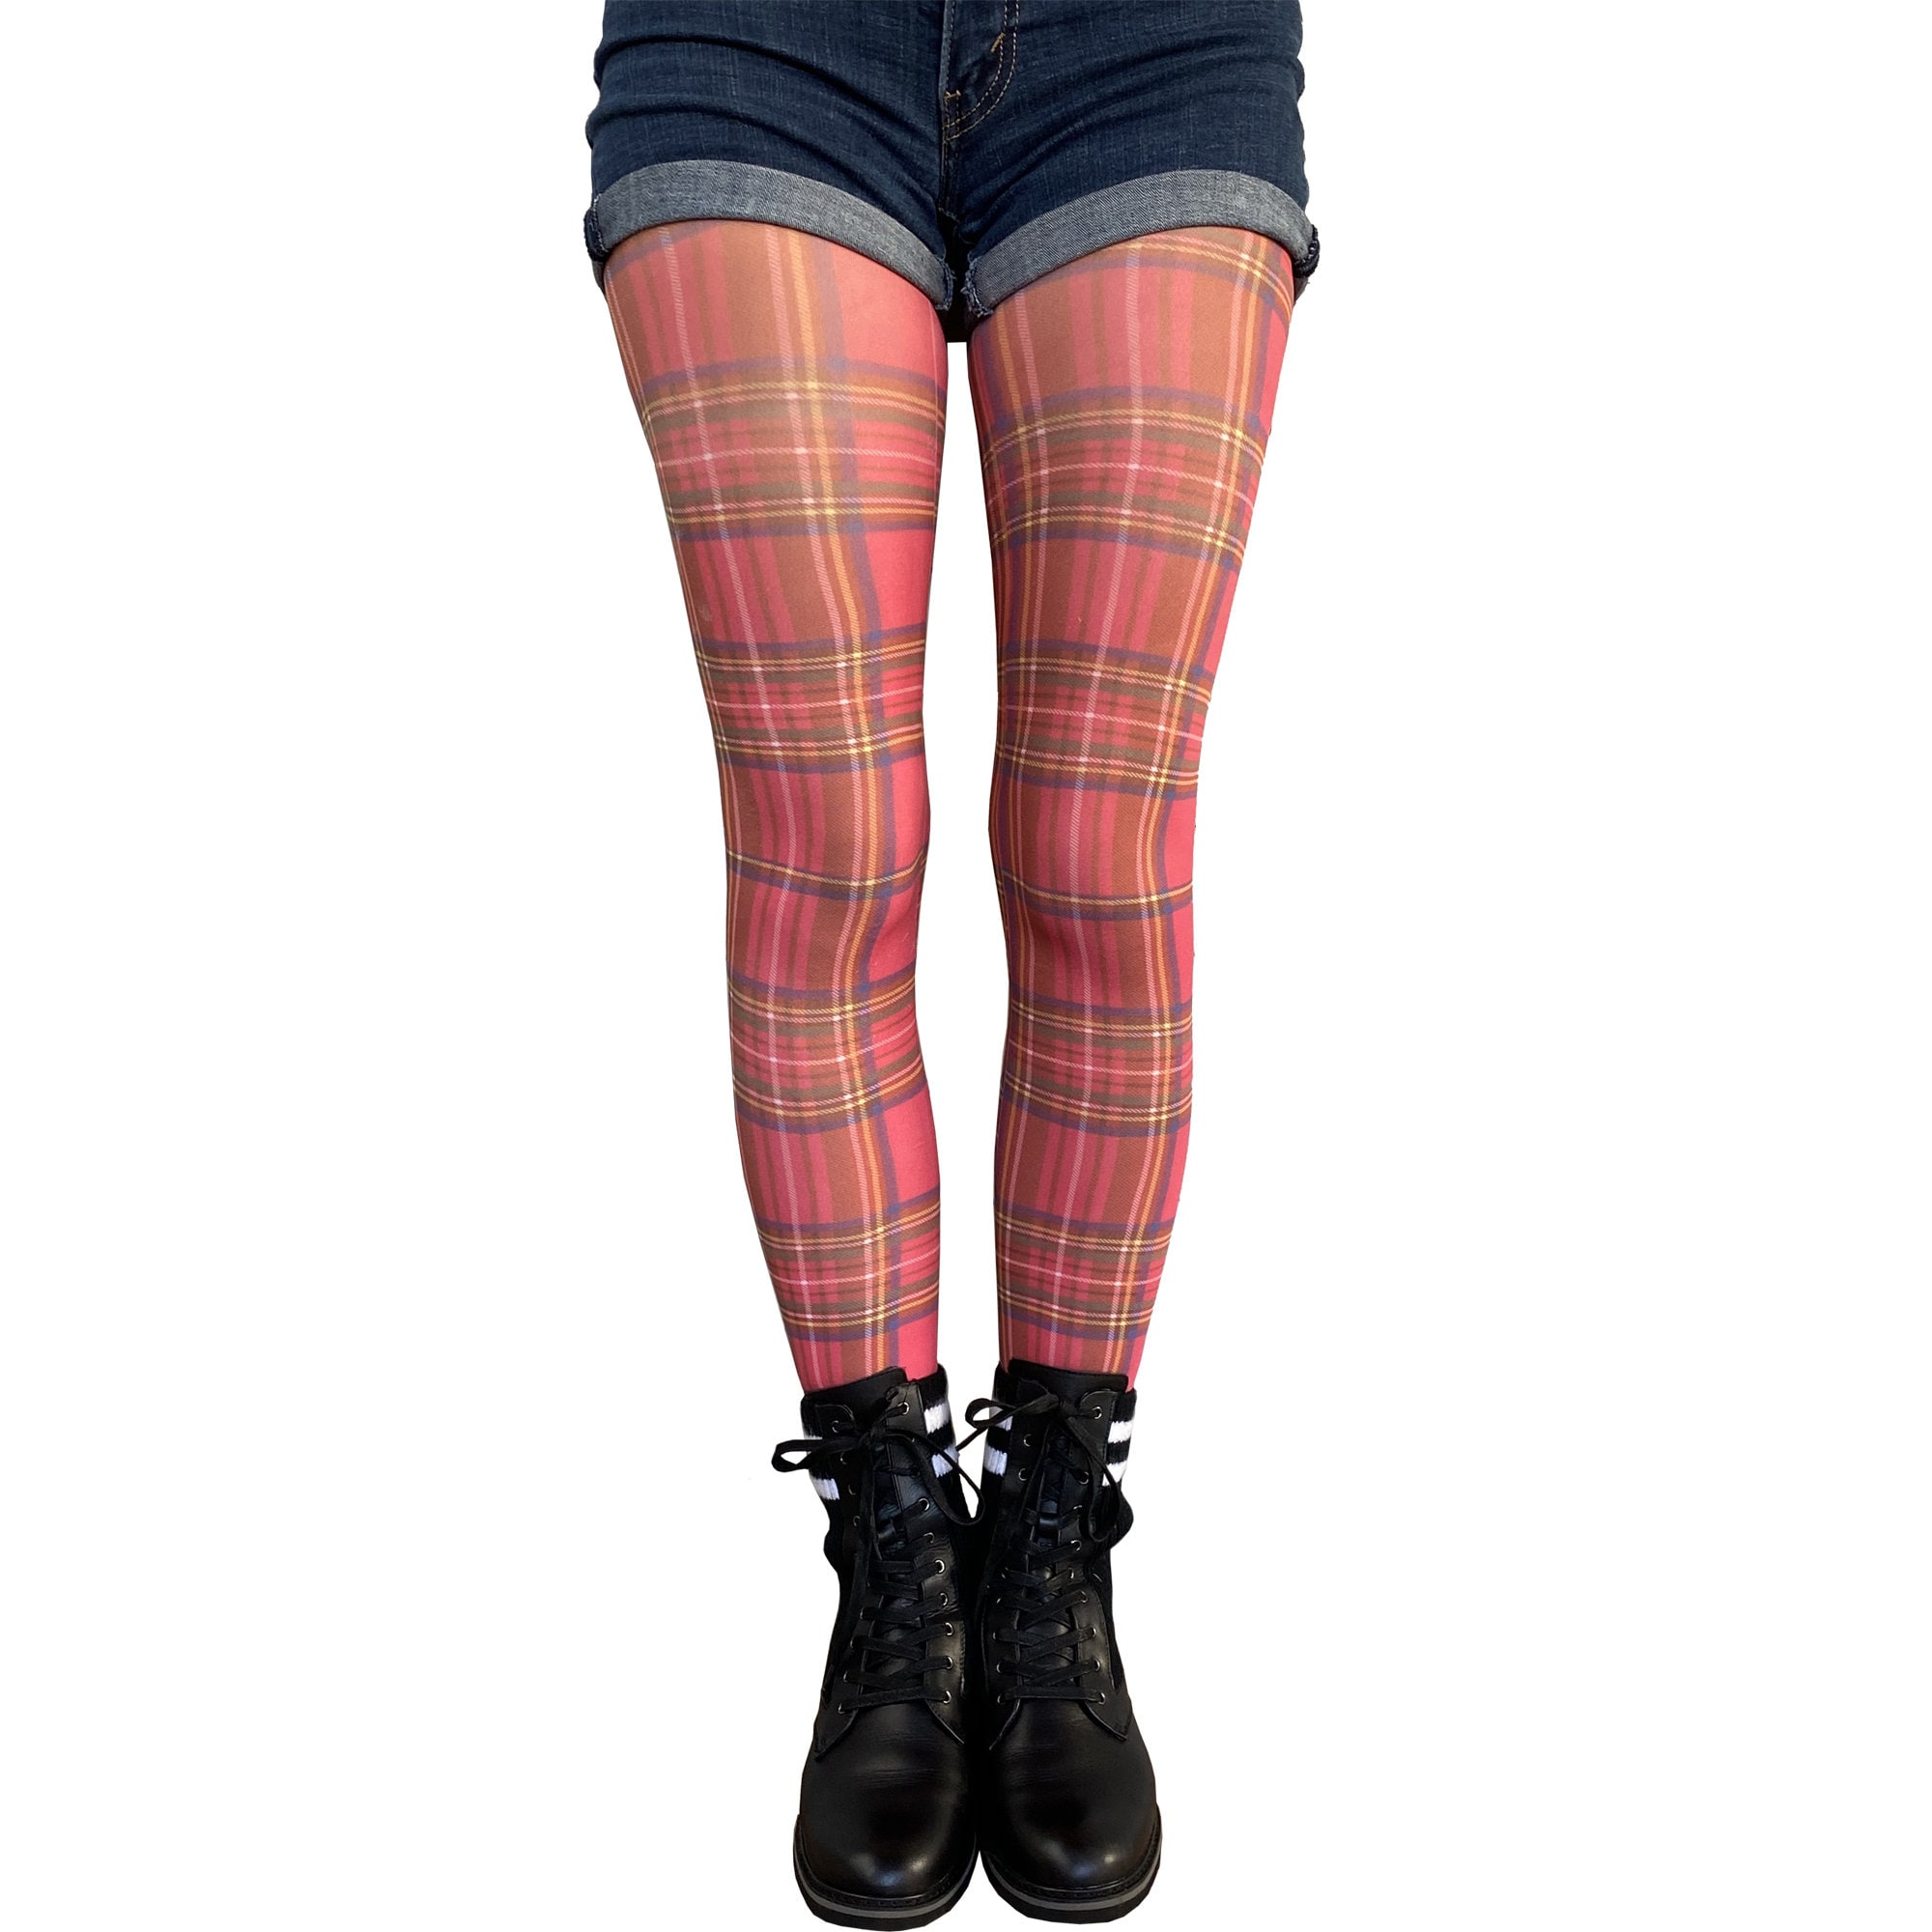 Red Plaid Tights Women's Opaque Patterned Pantyhose Available in Plus Size  Gift for Her -  Canada